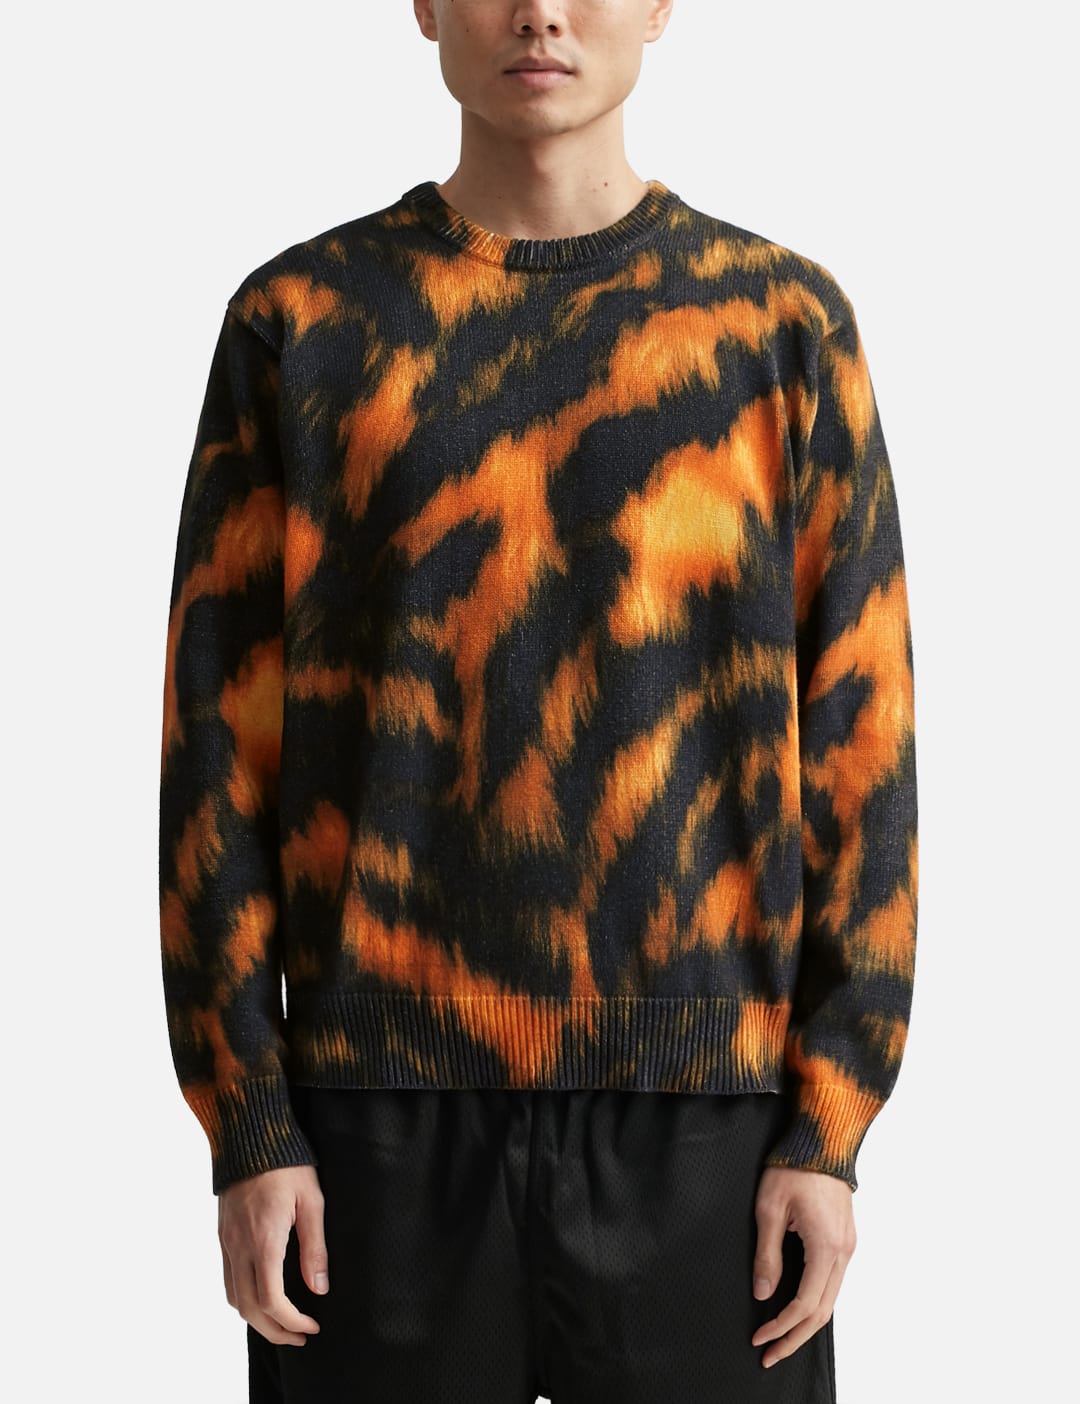 Stüssy - Printed Fur Sweater | HBX - Globally Curated Fashion and